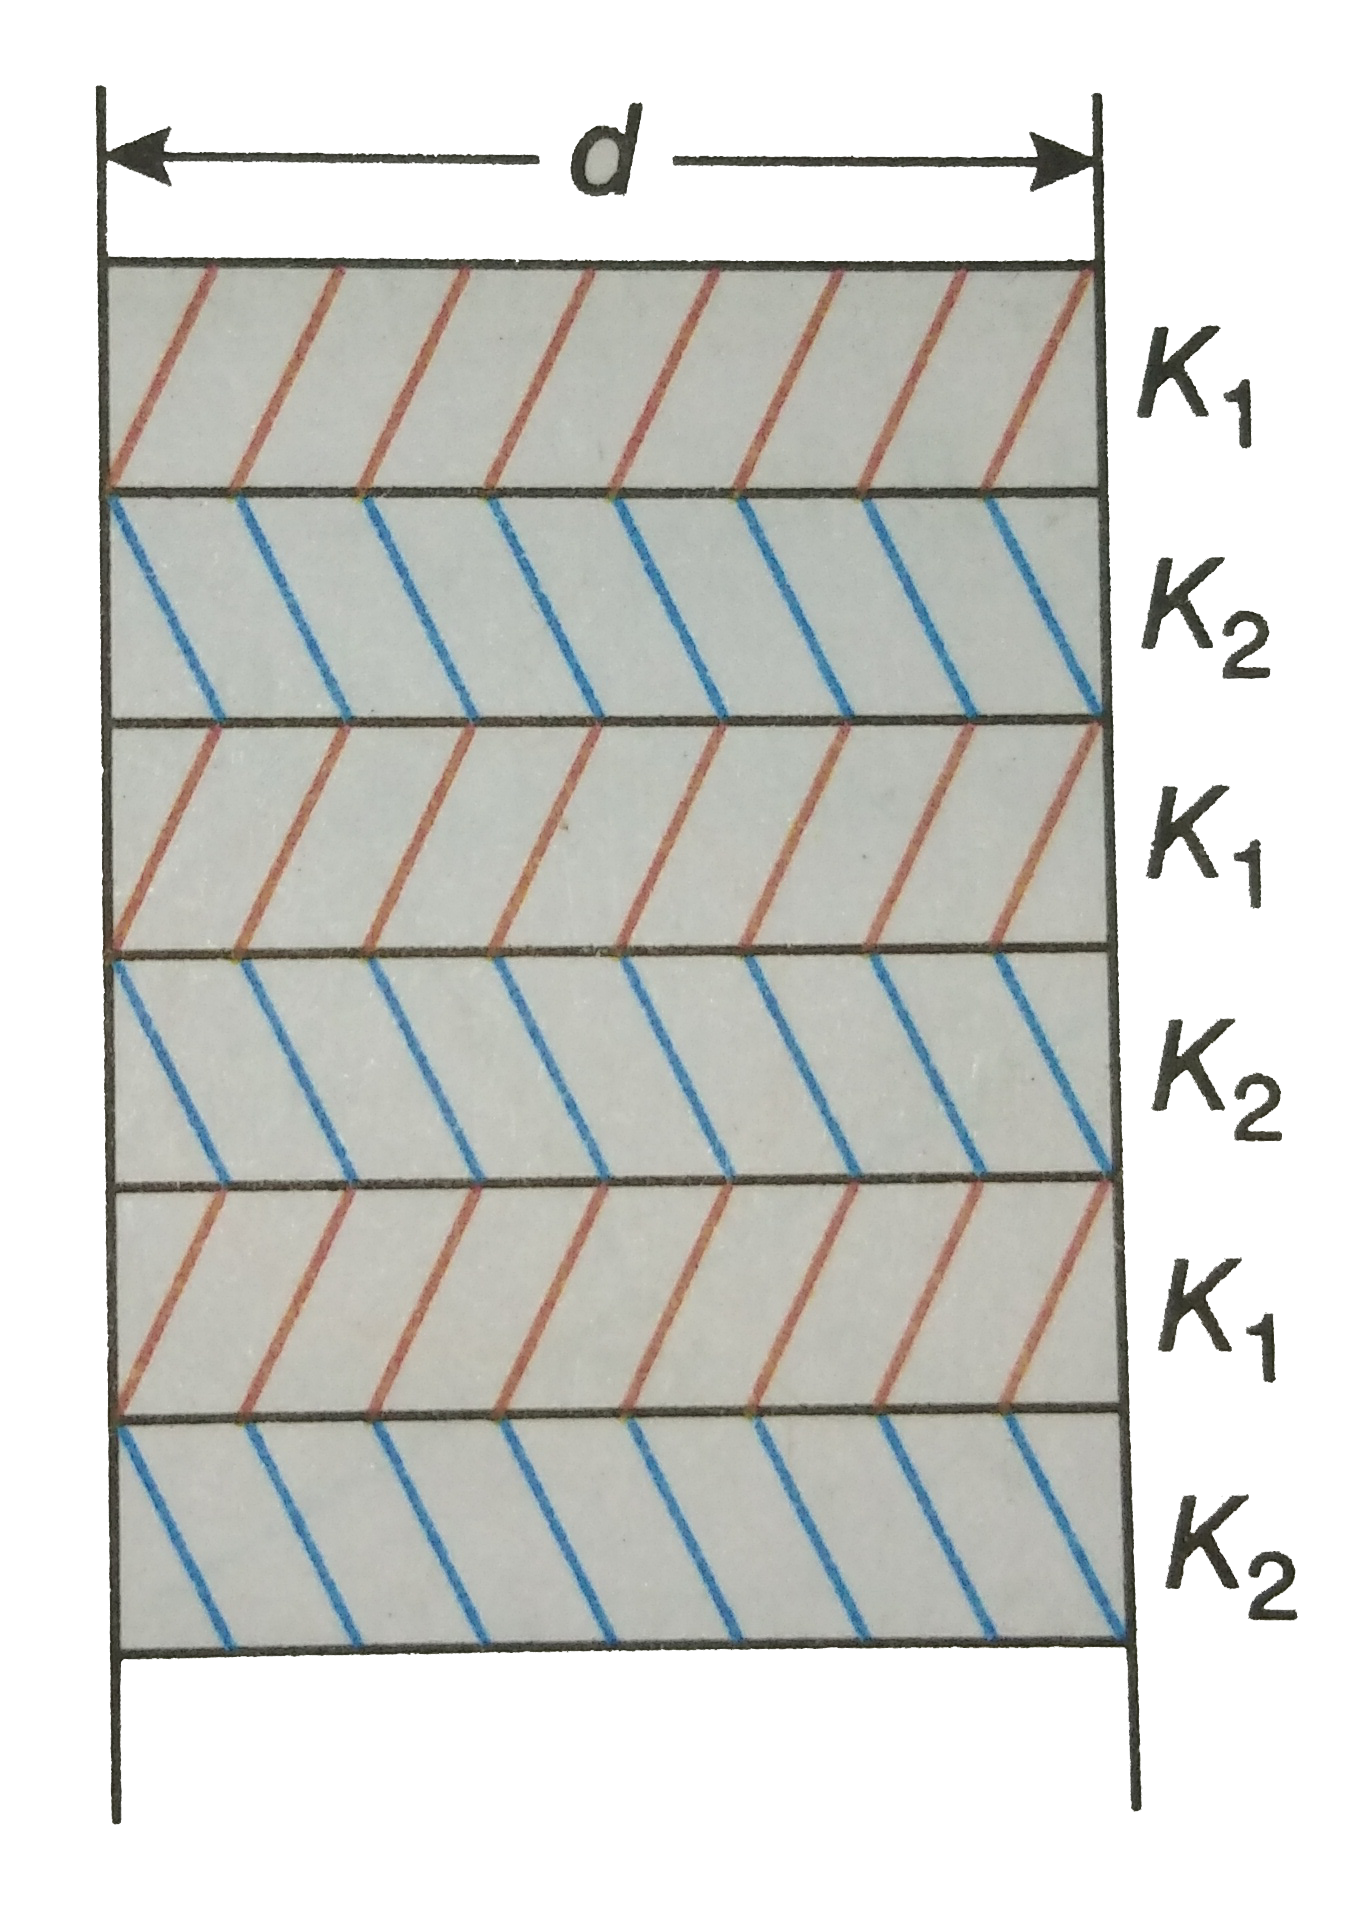 A wall consists of alternating blocks of length d and coefficient of thermal conducitivitly K(1) and K(2) respectively as shown in figure. The cross sectional area of the blocks are the same. The equivalent coefficient of thermal conductivity of the wall between left and right is